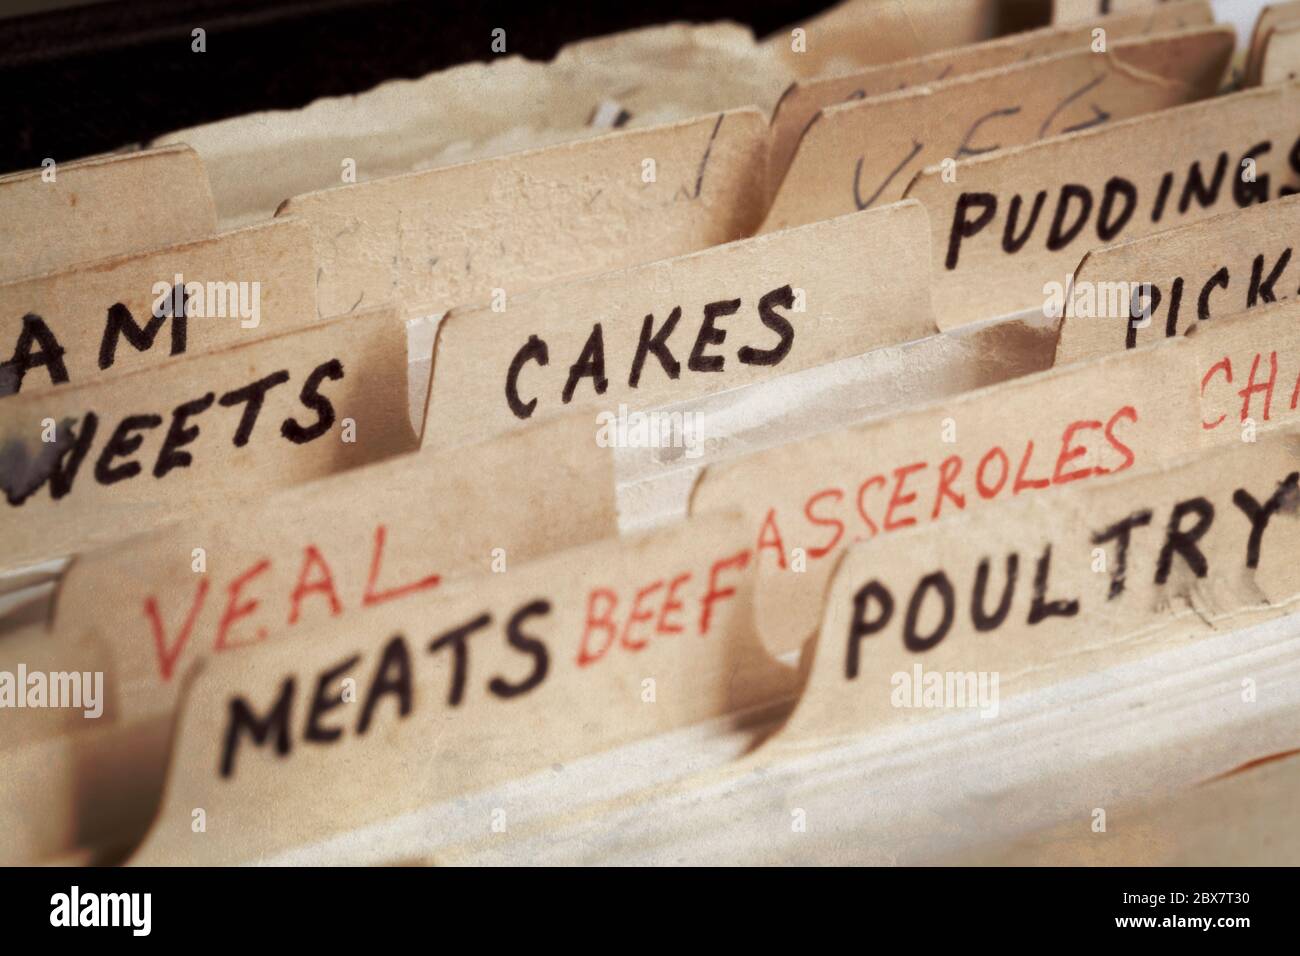 Old recipe box, with sections for cakes, meats, etc. Stock Photo